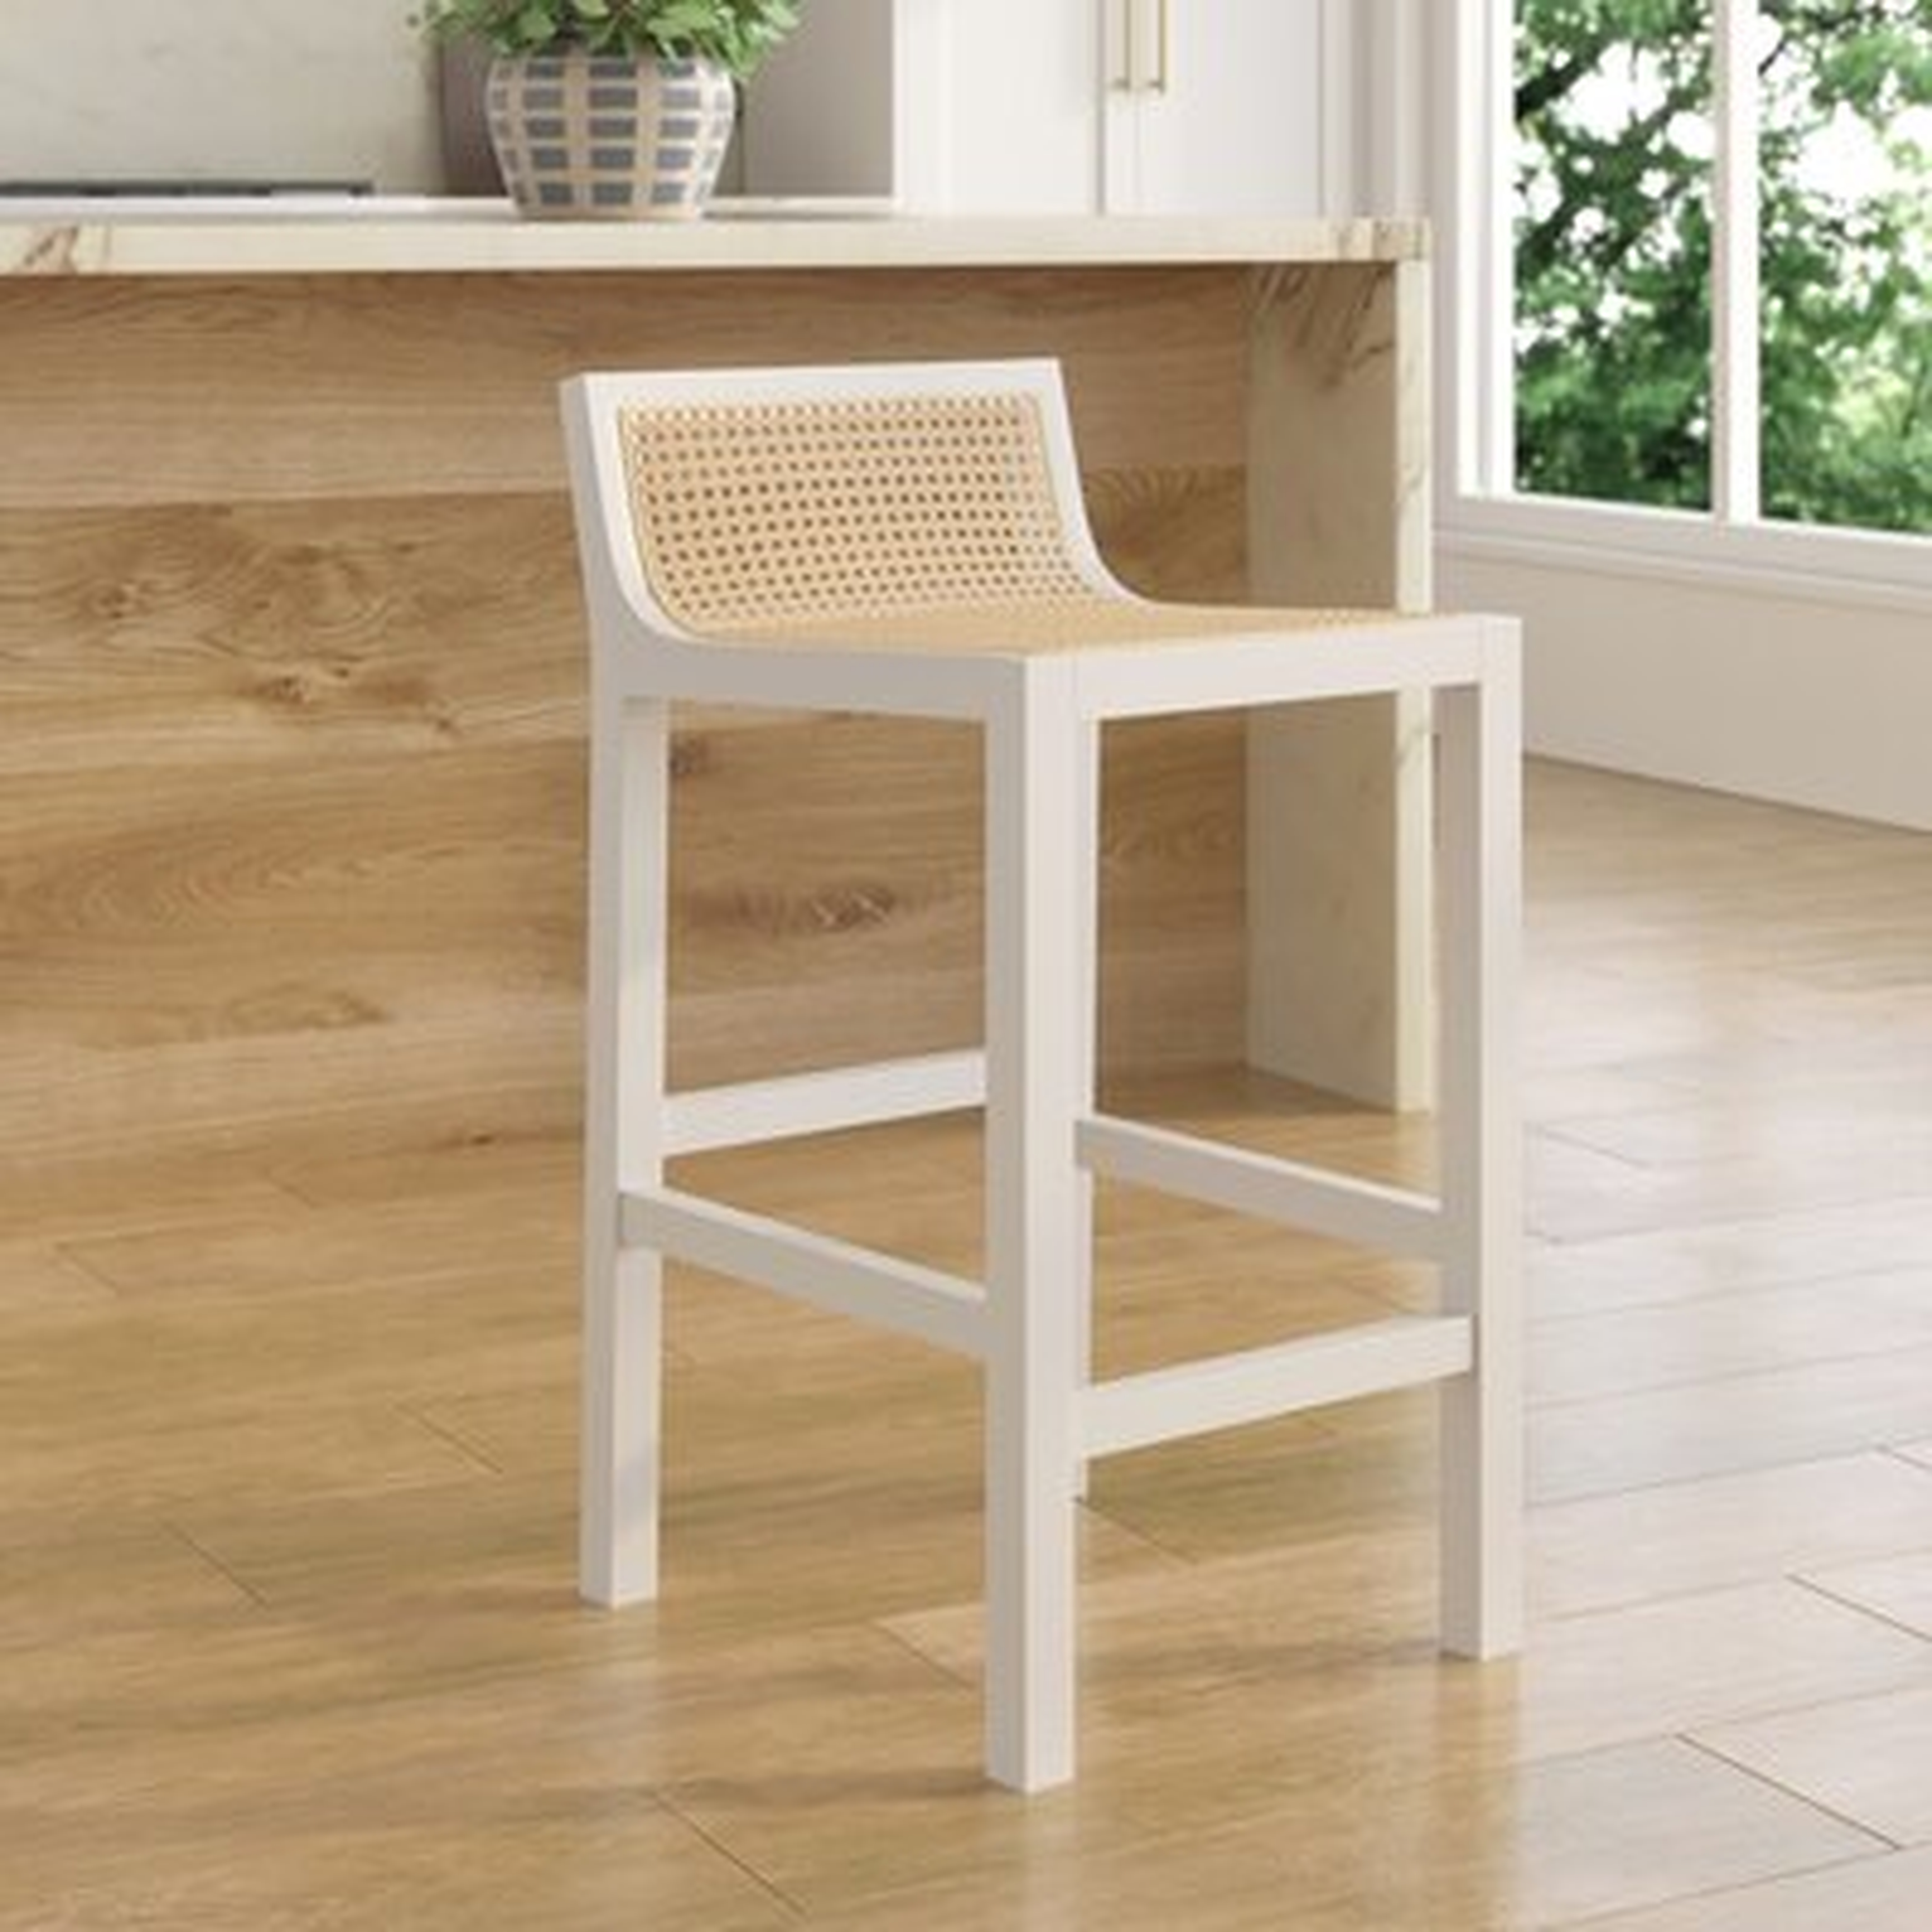 Barnhill Solid Wood And Natural Cane Stool - Wayfair